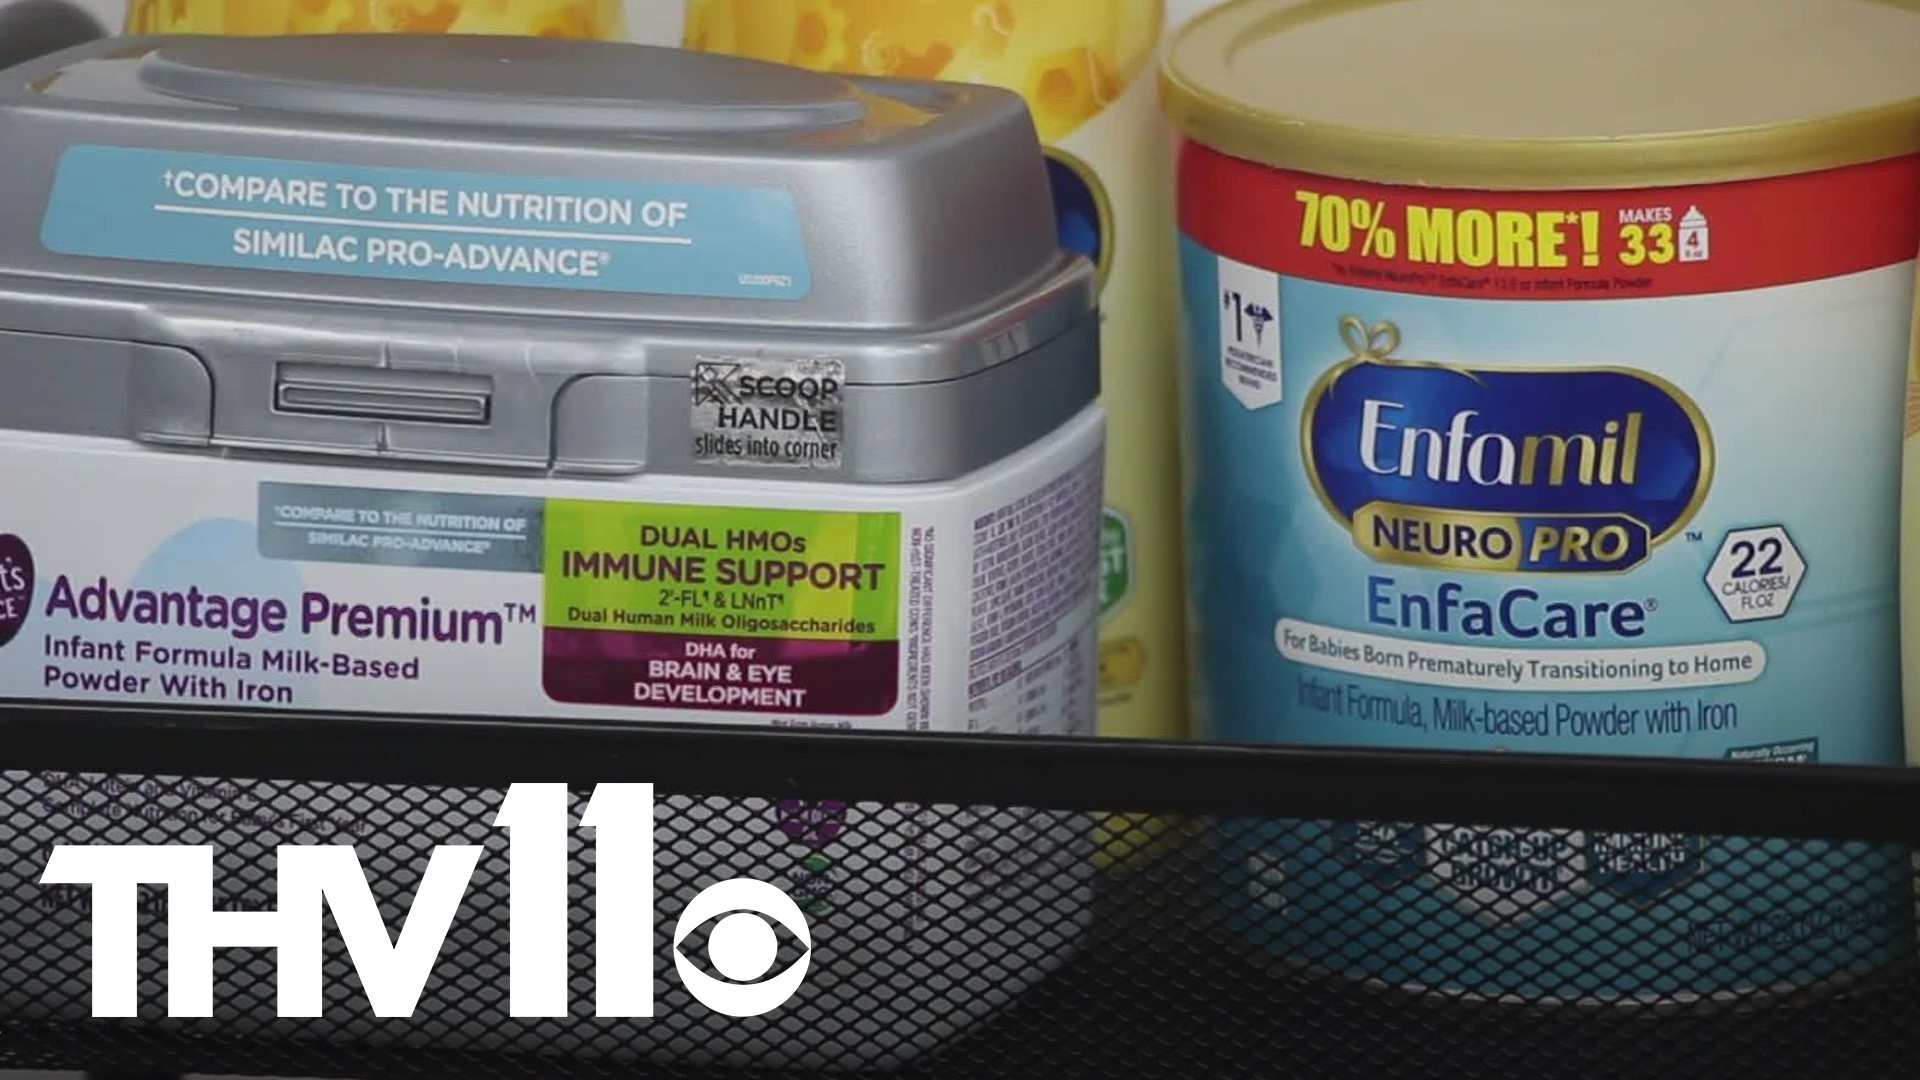 Some families can't wait for the baby formula shortage to end and communities are stepping in to help each other.